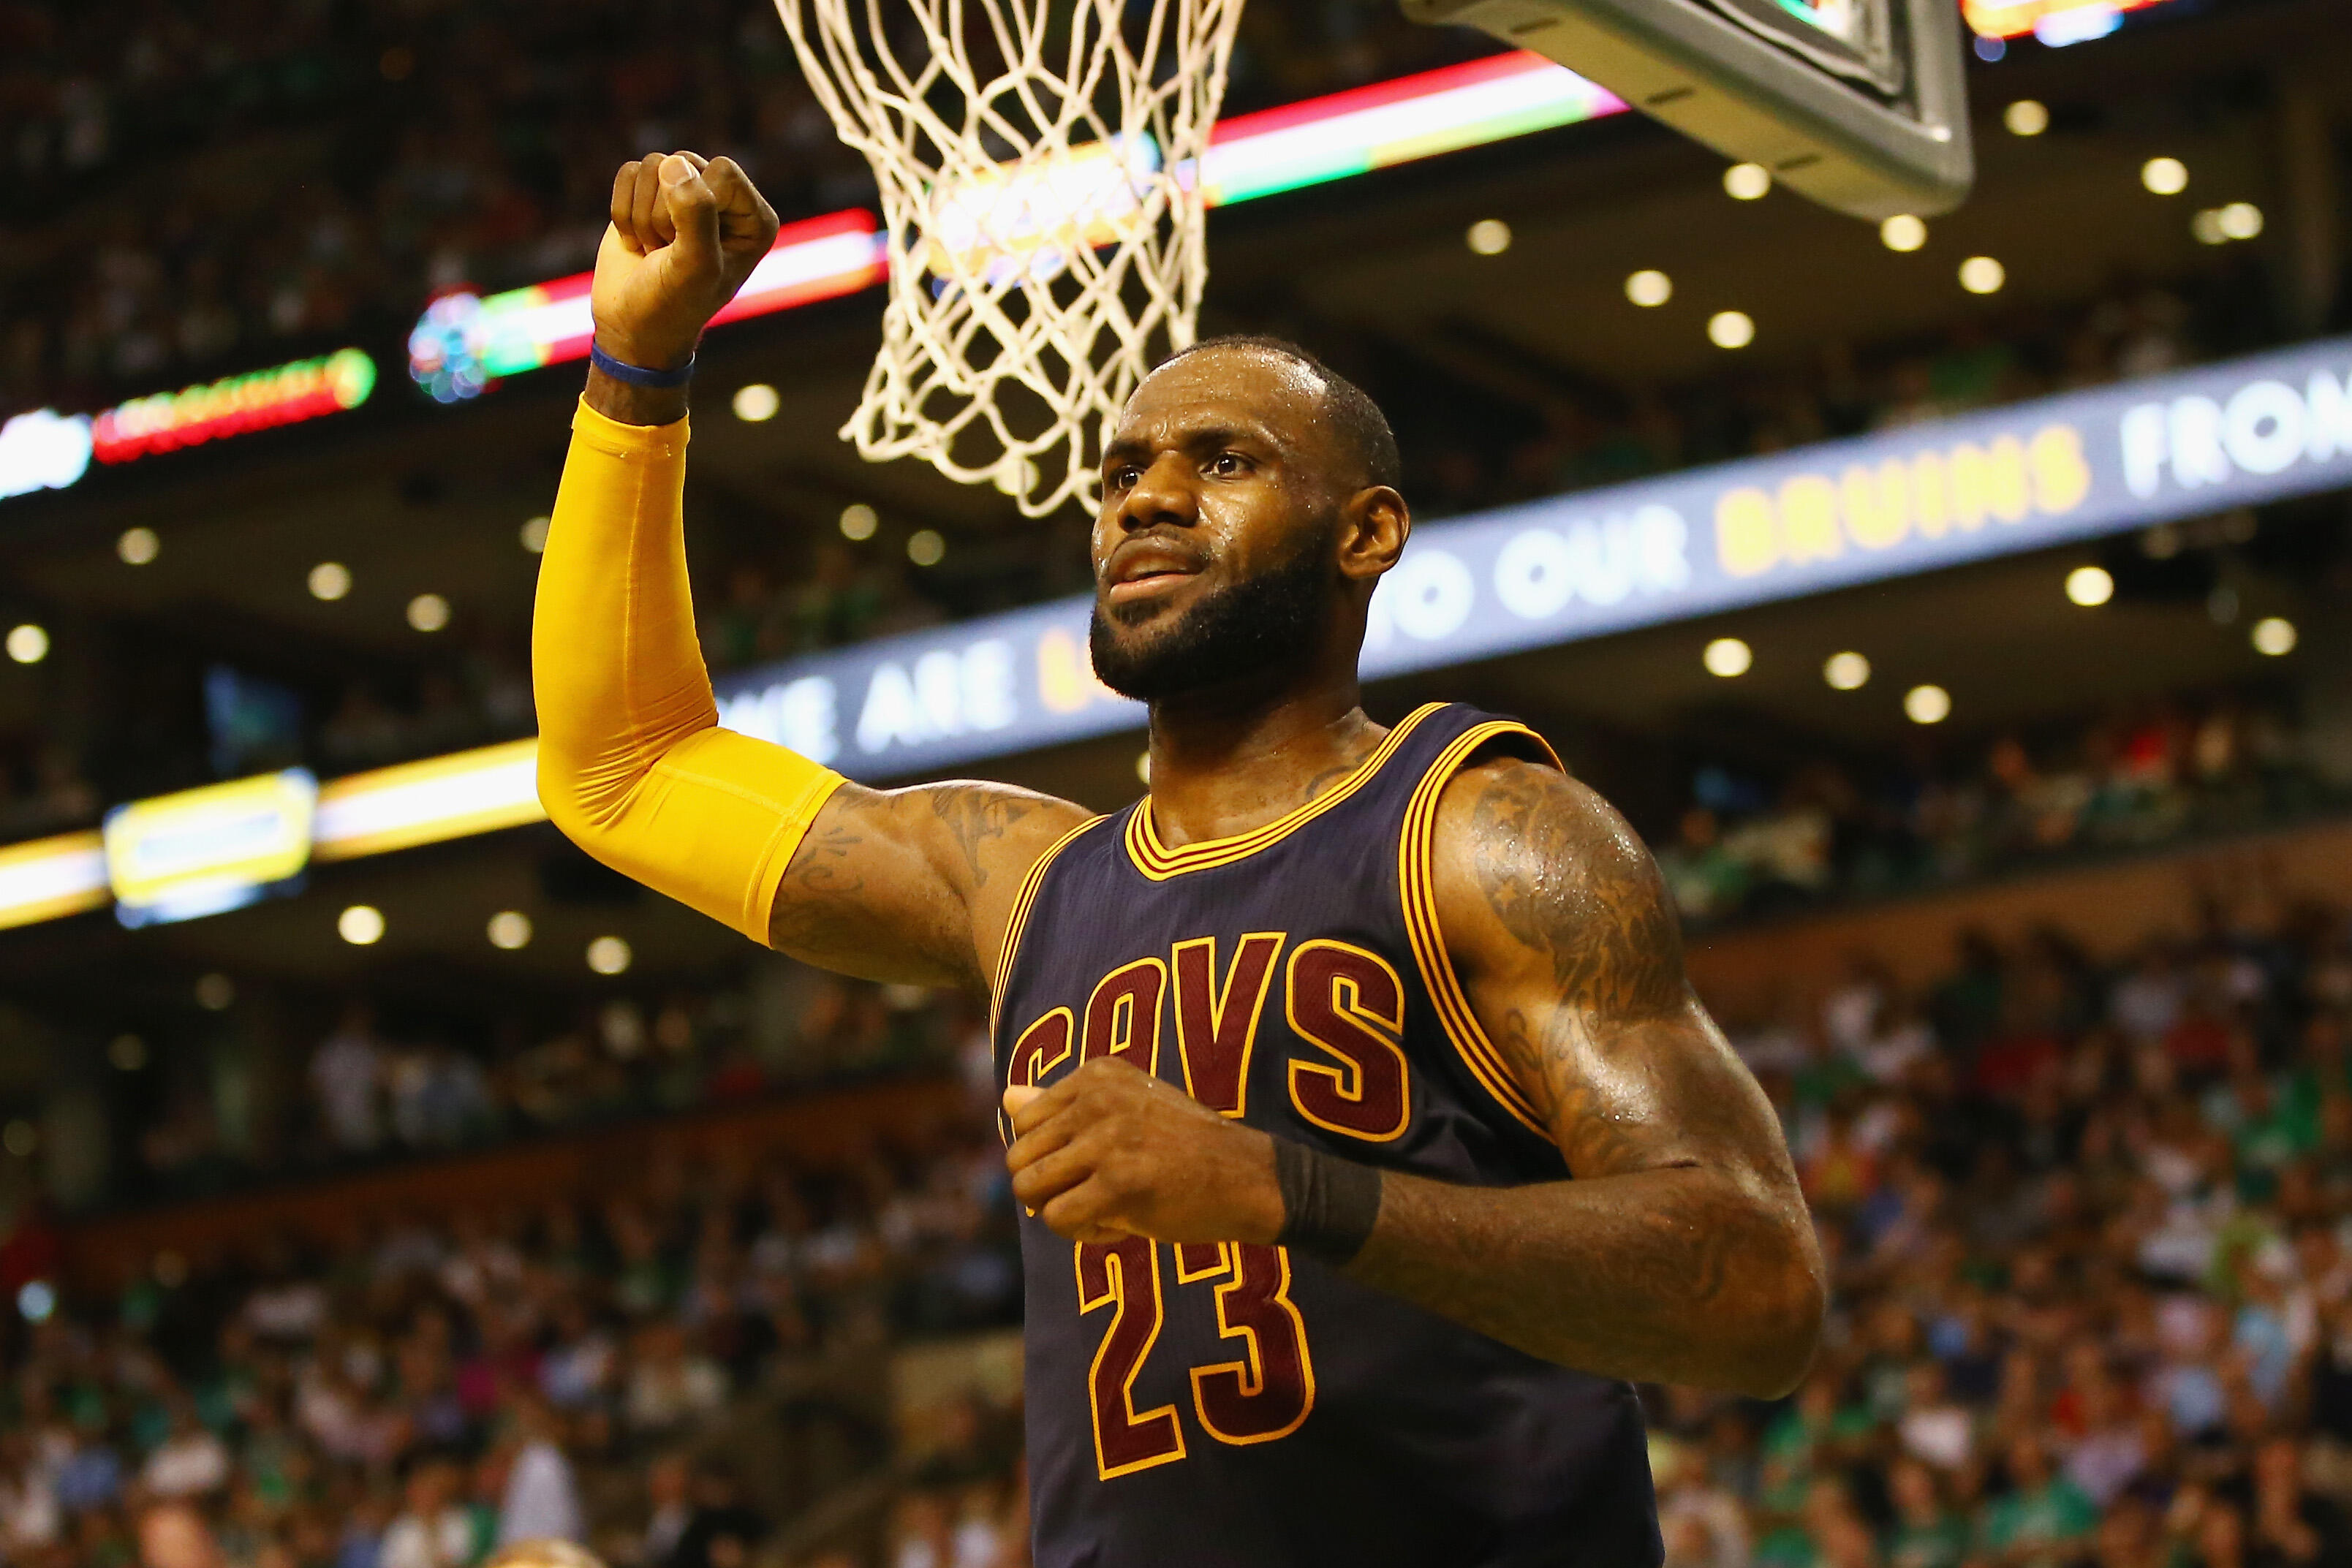 BOSTON, MA - MAY 19:  LeBron James #23 of the Cleveland Cavaliers reacts in the first half against the Boston Celtics during Game Two of the 2017 NBA Eastern Conference Finals at TD Garden on May 19, 2017 in Boston, Massachusetts. NOTE TO USER: User expre